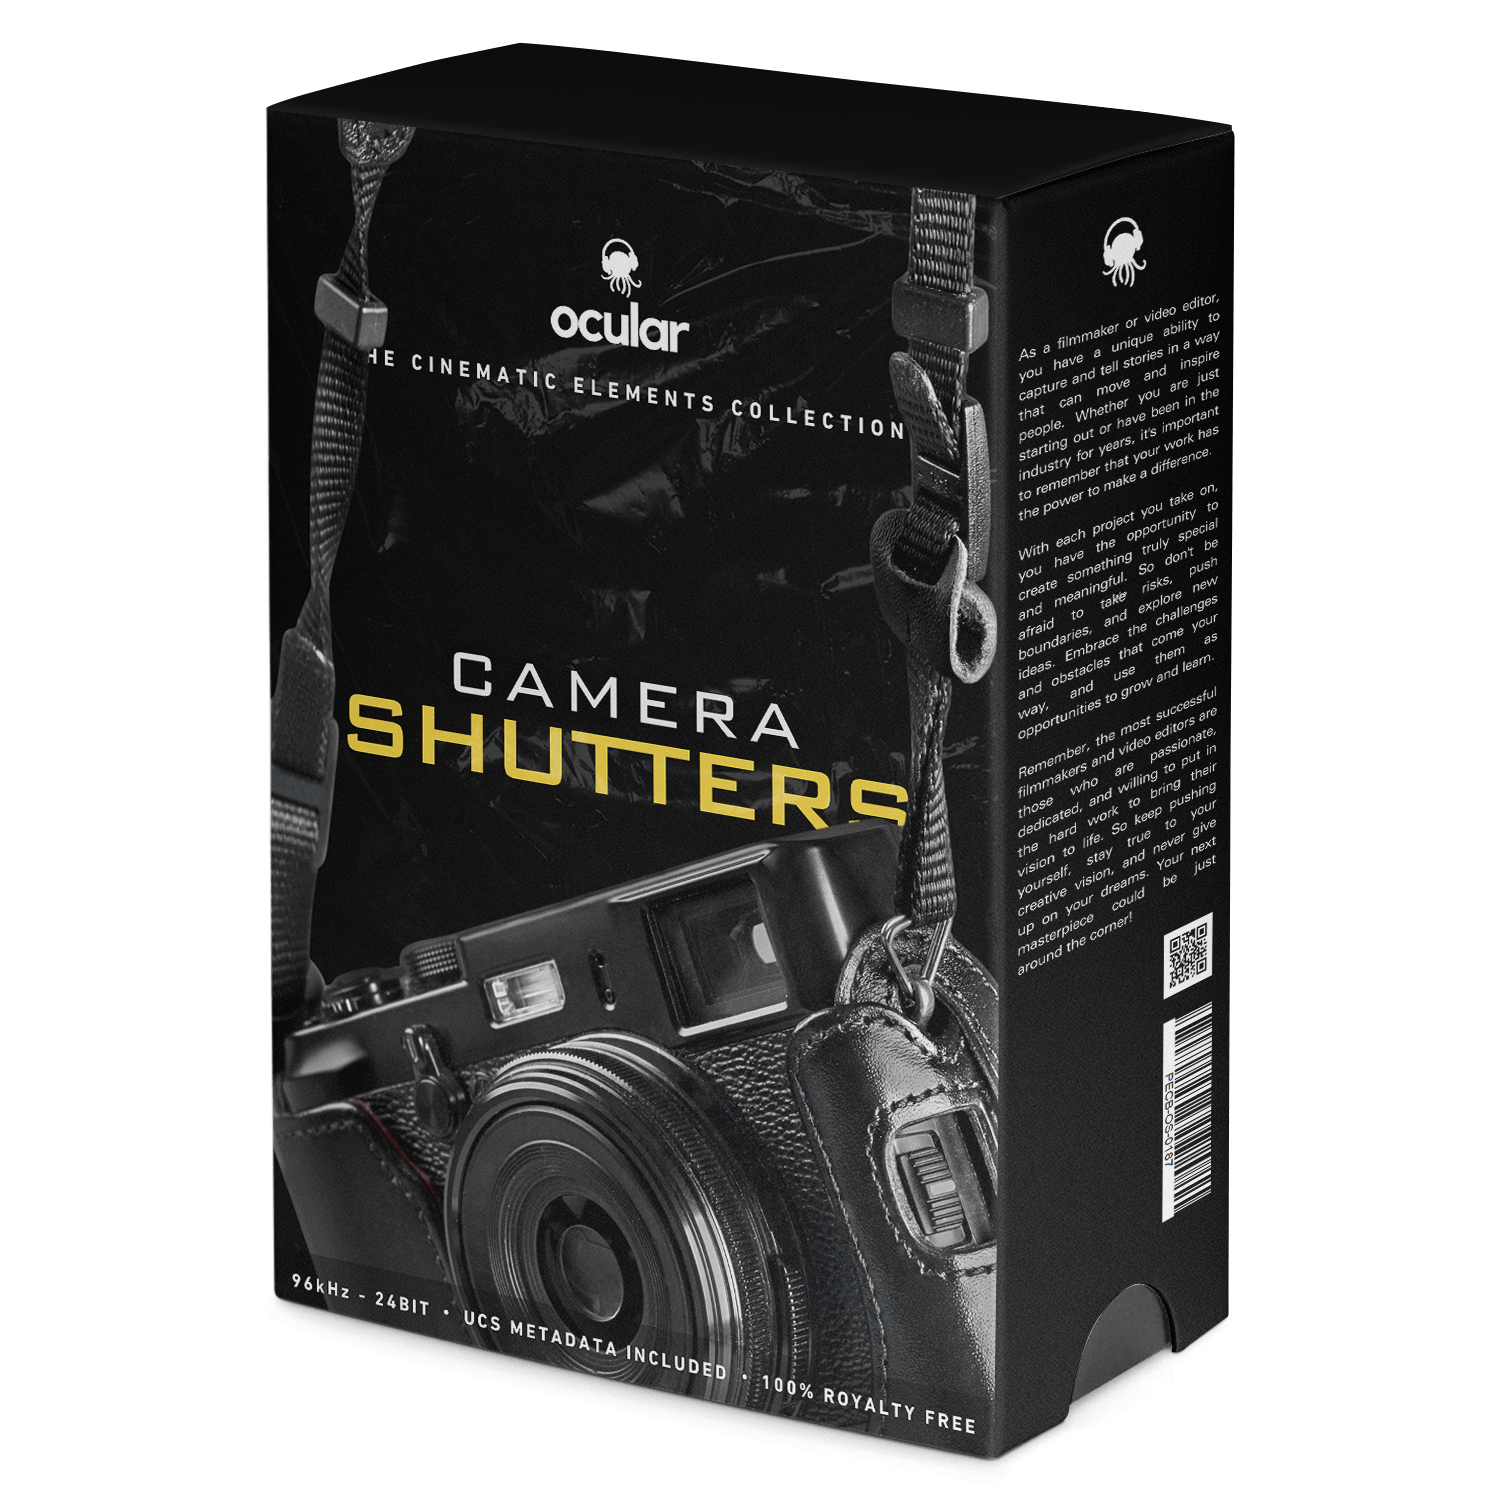 Camera Shutters Sound Effects Library.